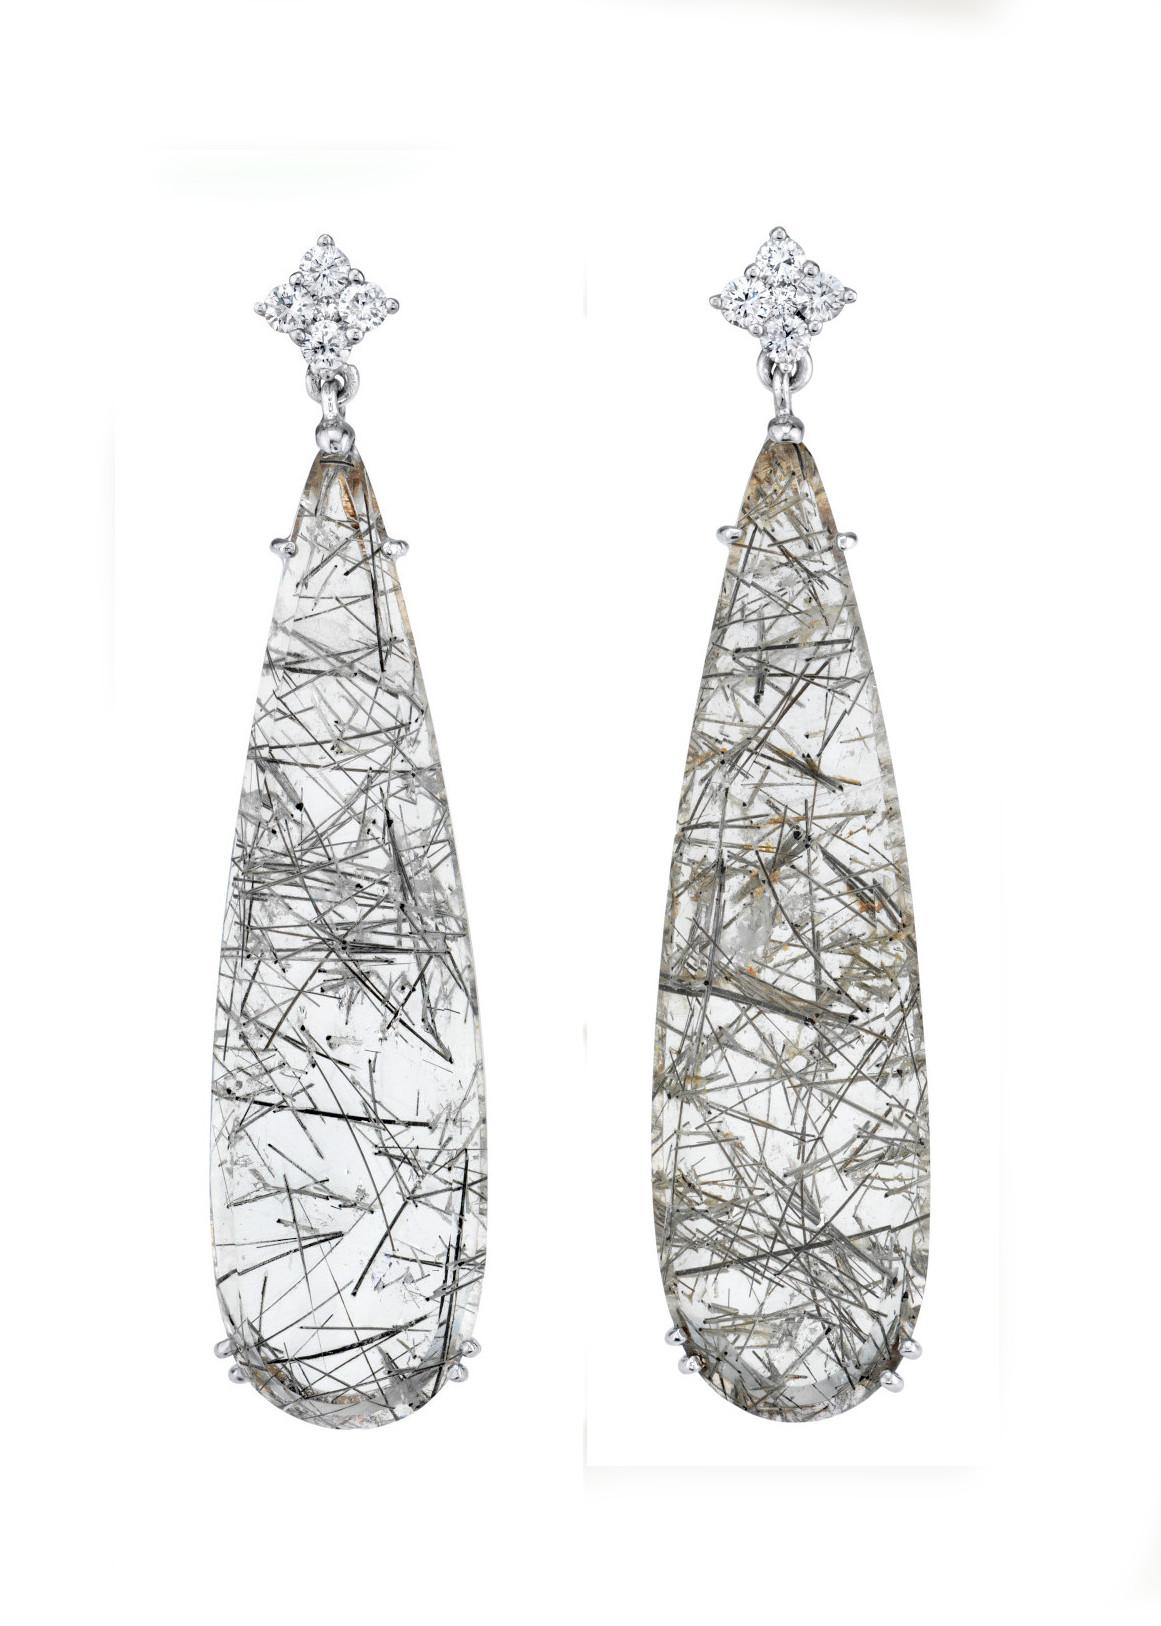 These knock-out gemstone earrings could rock the red carpet or be worn with jeans and a crisp white shirt, depending on the occasion! They feature clear quartz crystal drops with gorgeous actinolite 